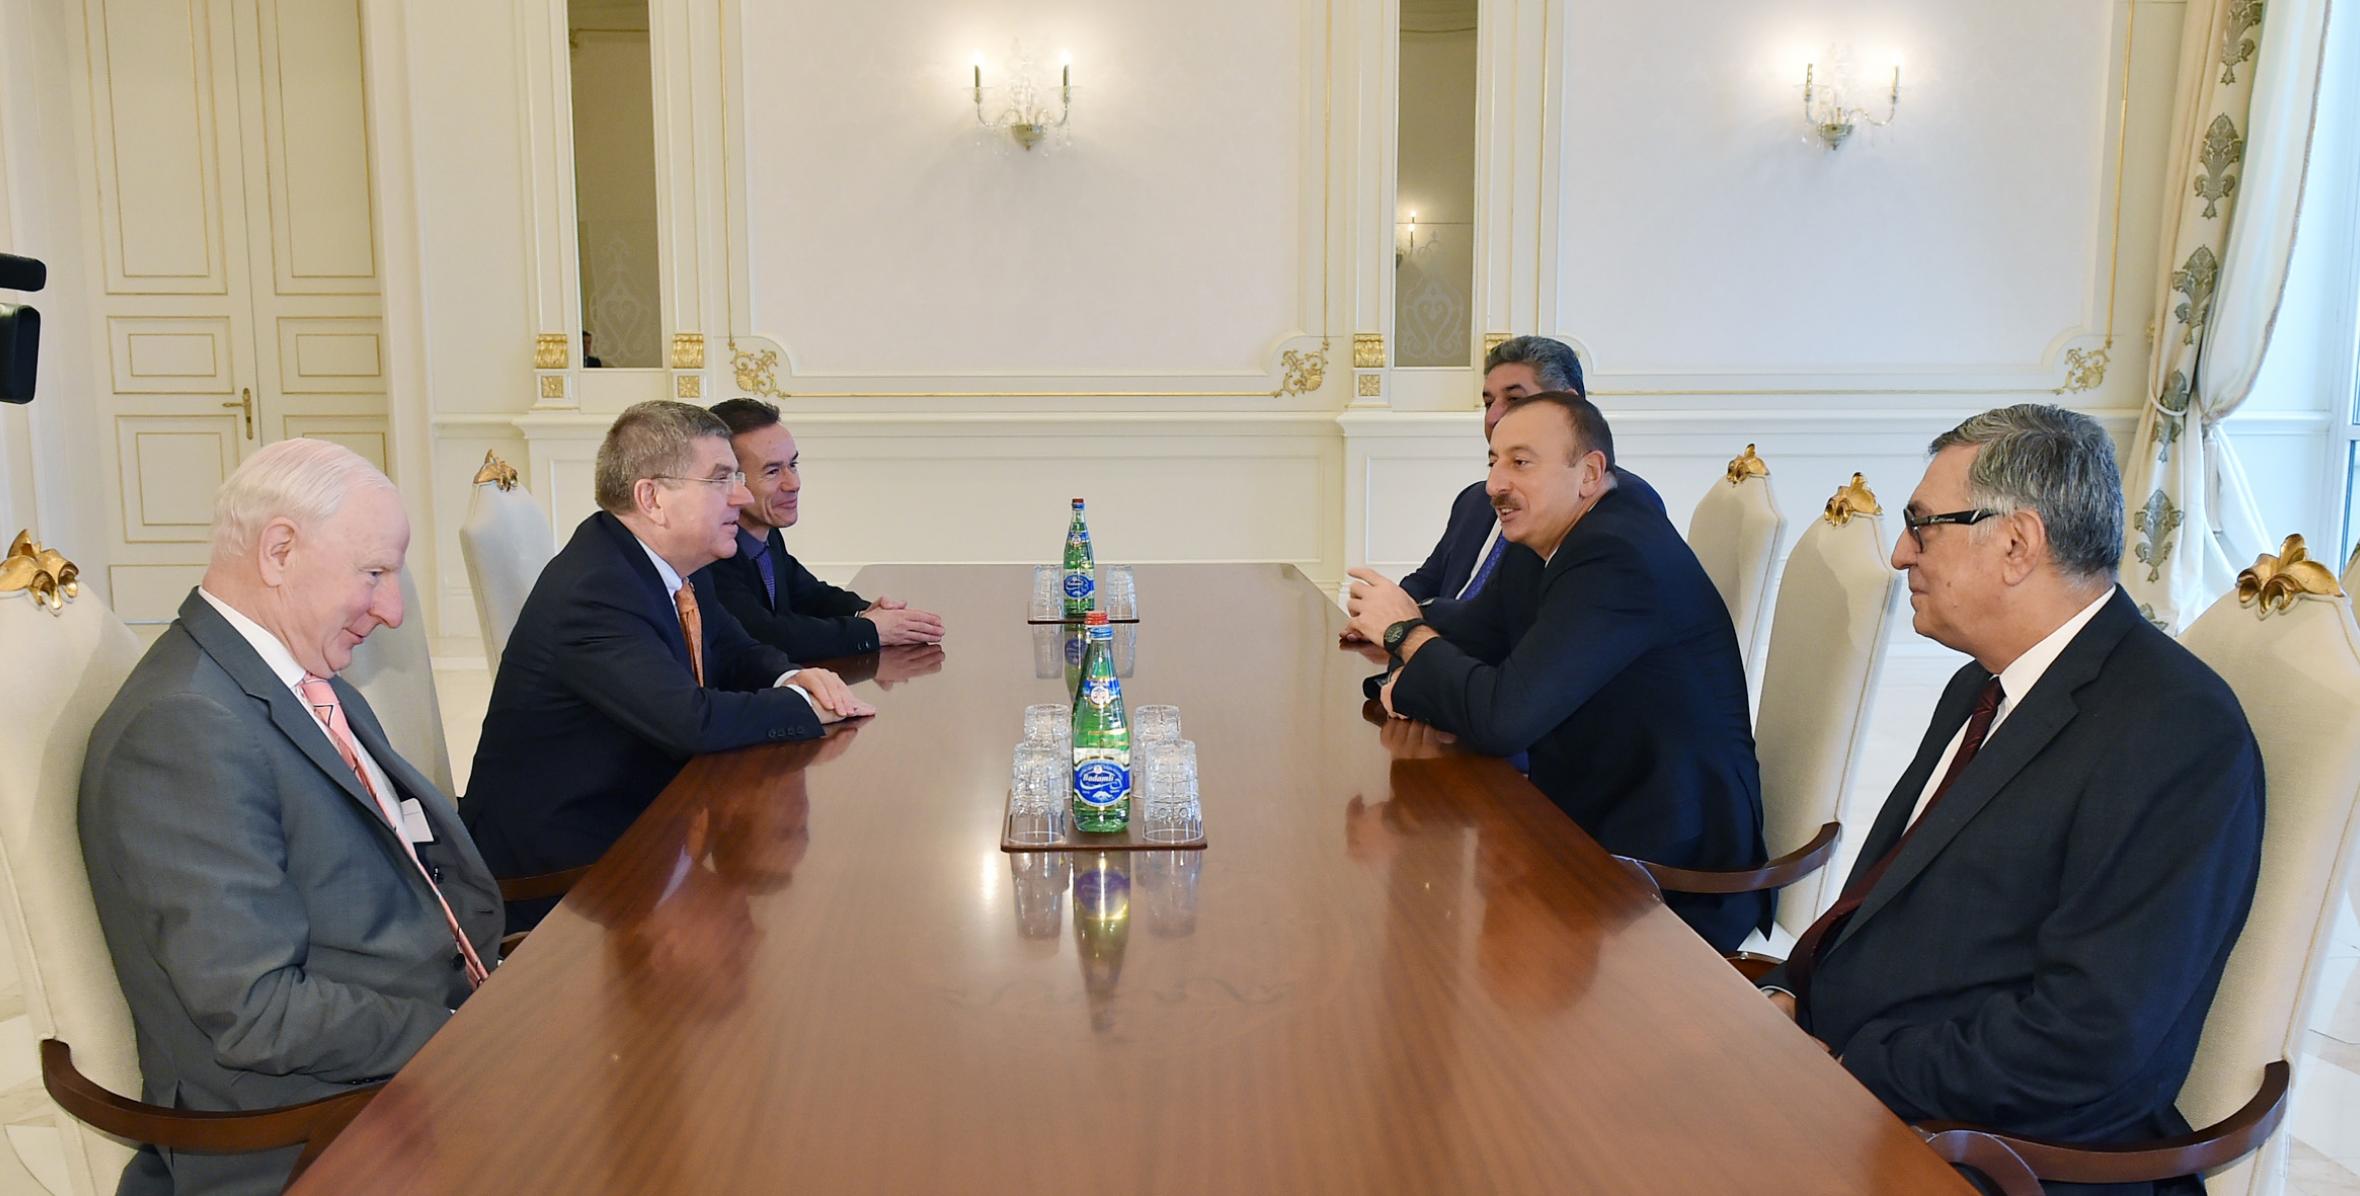 Ilham Aliyev received the presidents of the International Olympic Committee and the European Olympic Committees